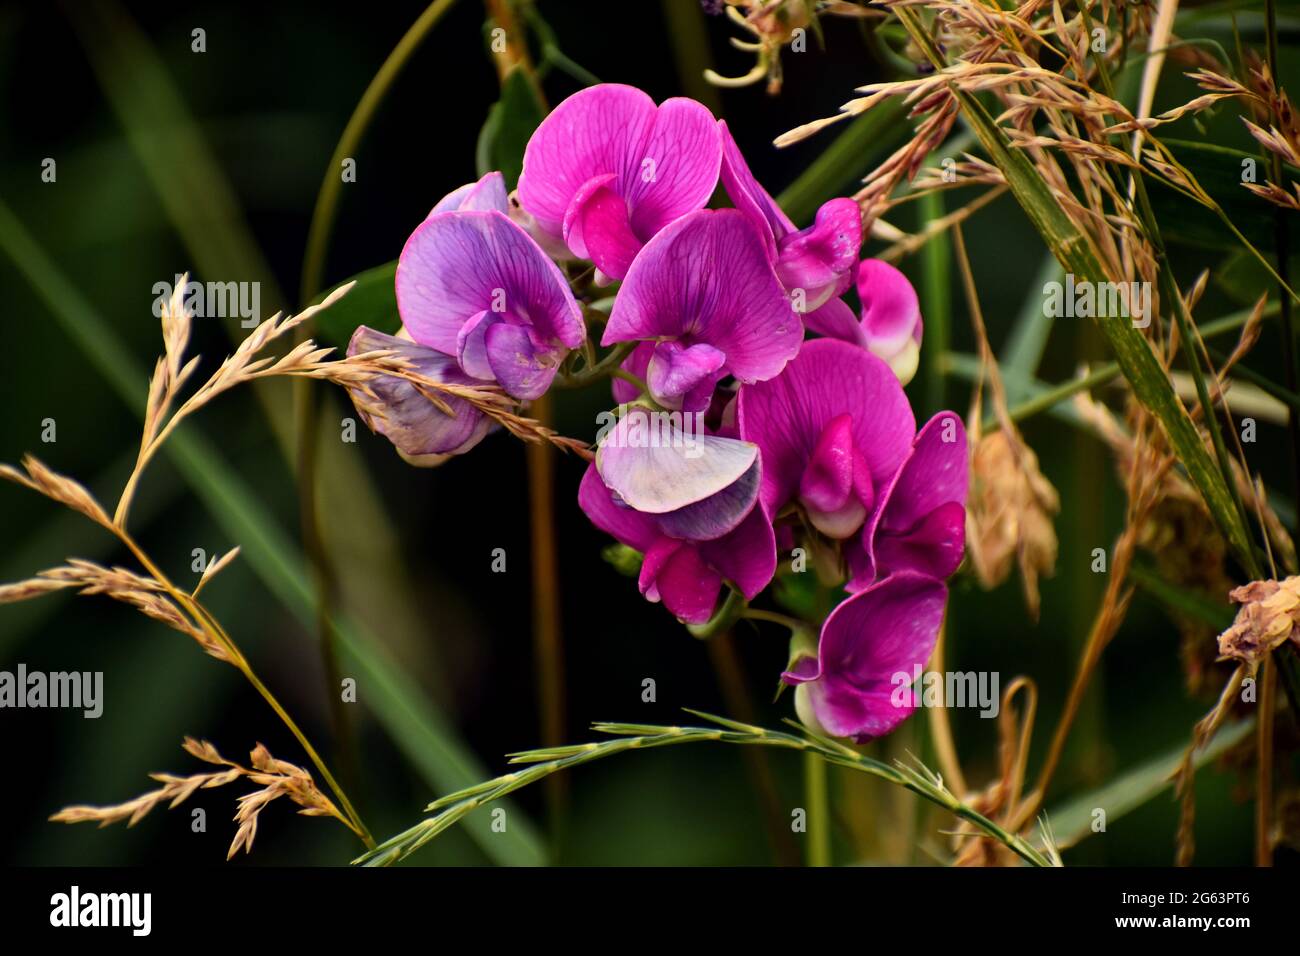 Pink purple sweet pea (Lathyrus odoratus) flowers mixed with green and tan grasses. Stock Photo